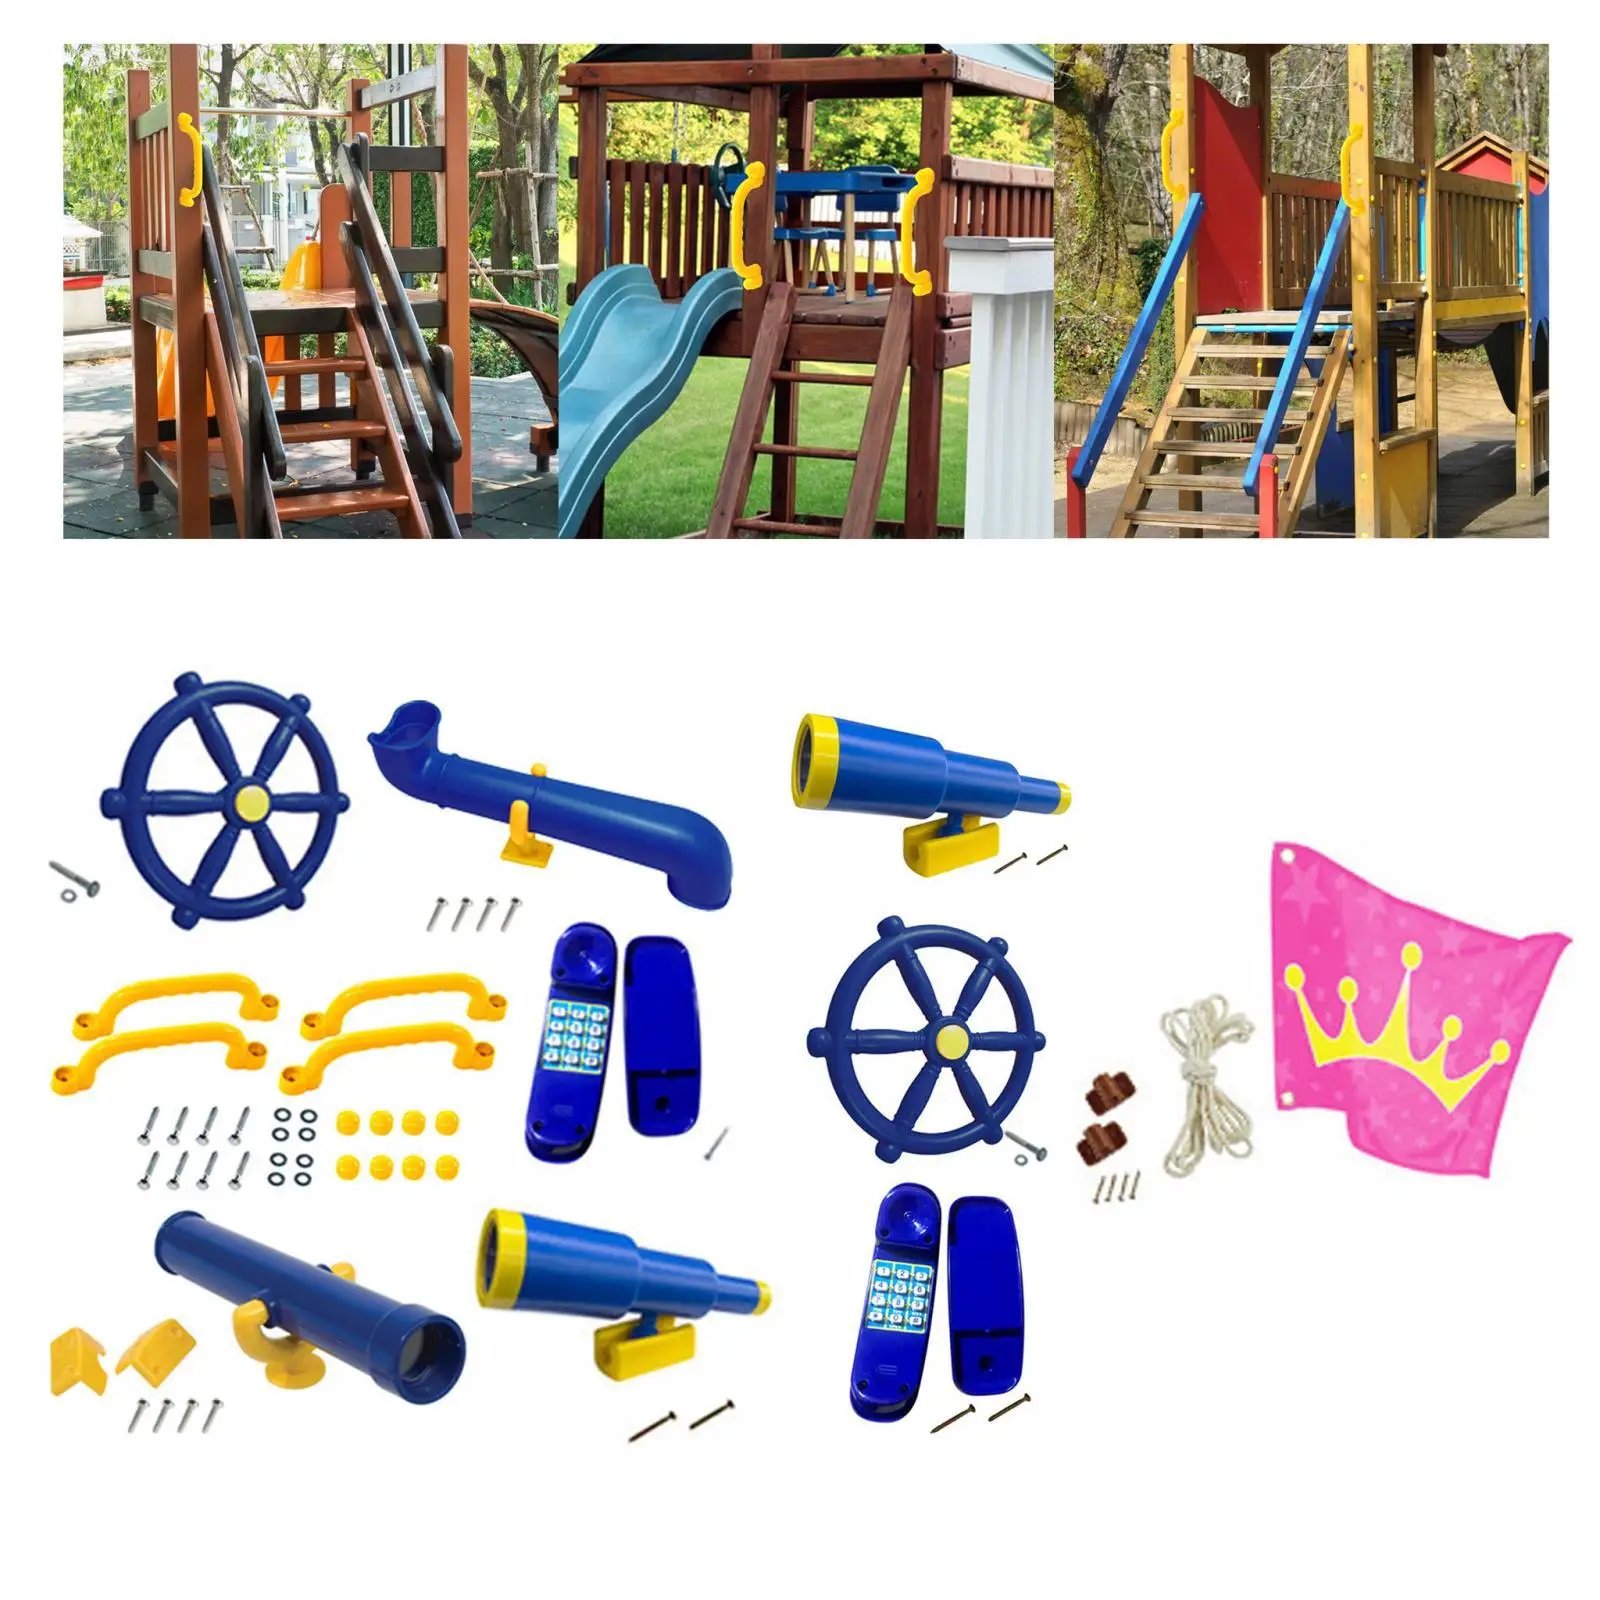 Playground Accessories Steering Wheel Outdoor Games Toys Outdoor Playset for Backyard Jungle Play House Tree House Children